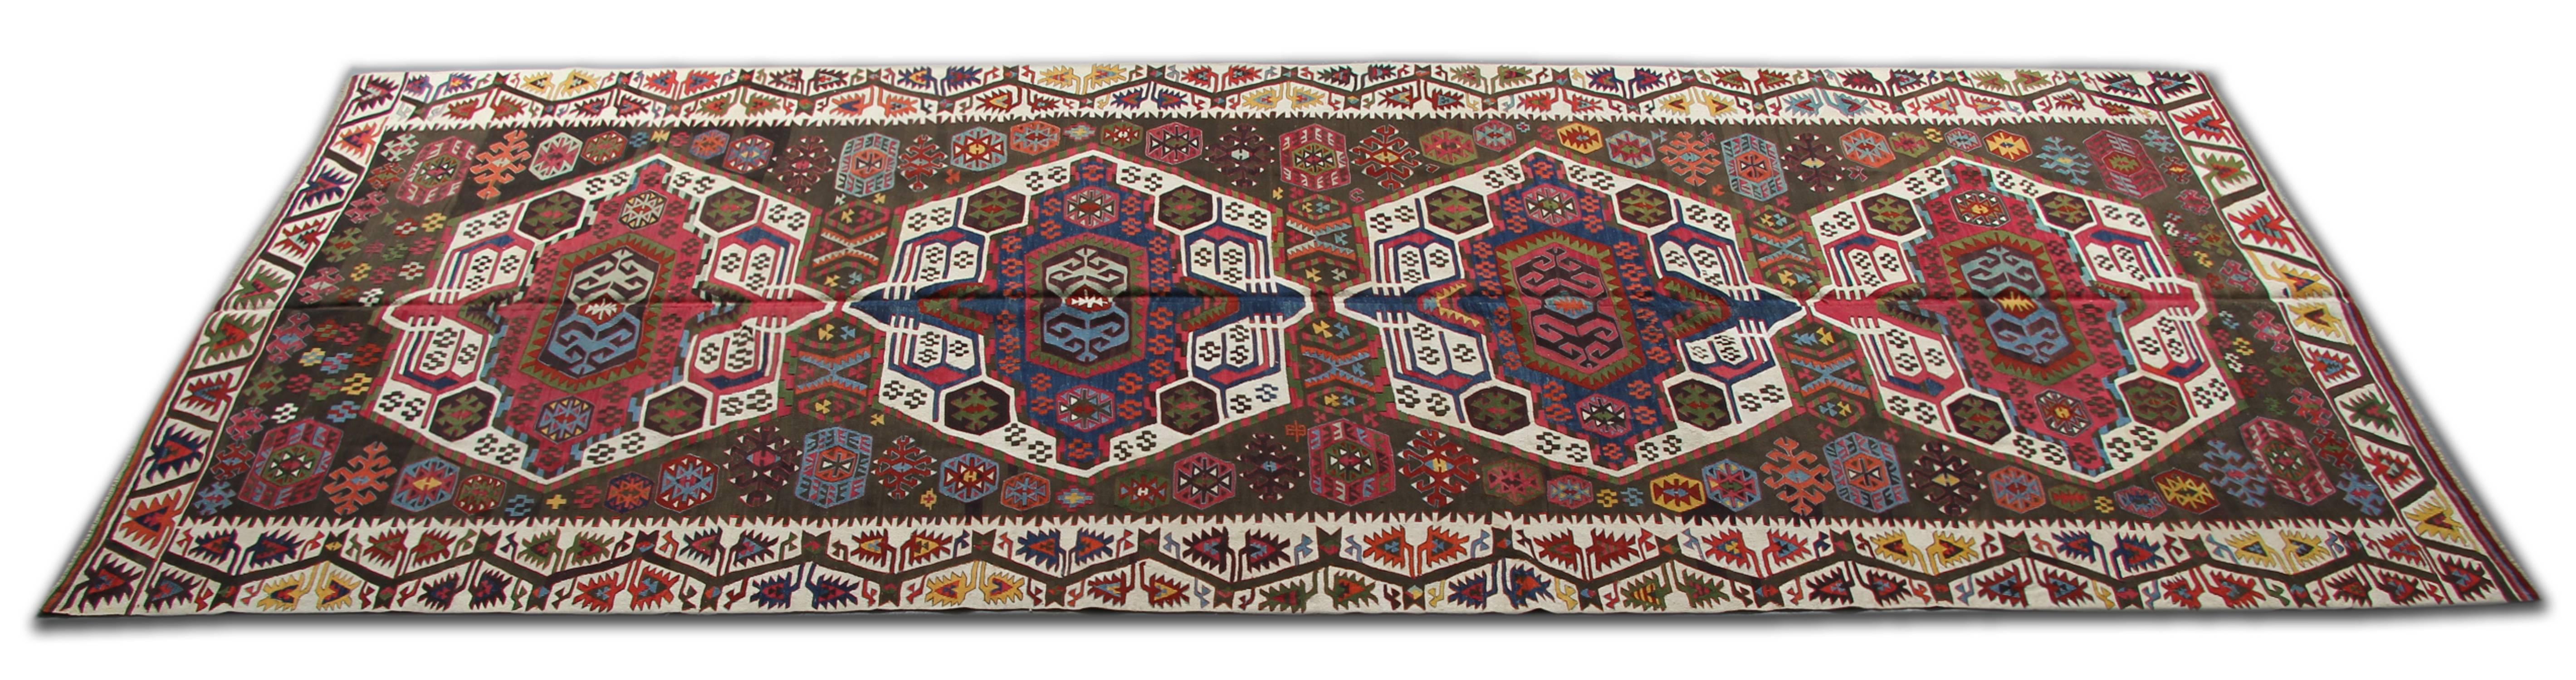 This Turkish rug is Kayseri antique rug traditional handwoven runner rugs come from the Caucasian carpet design world. This kind of carpet runners is suitable for stair runners and hallway rugs. In a striking colour combination of bright red, shiny